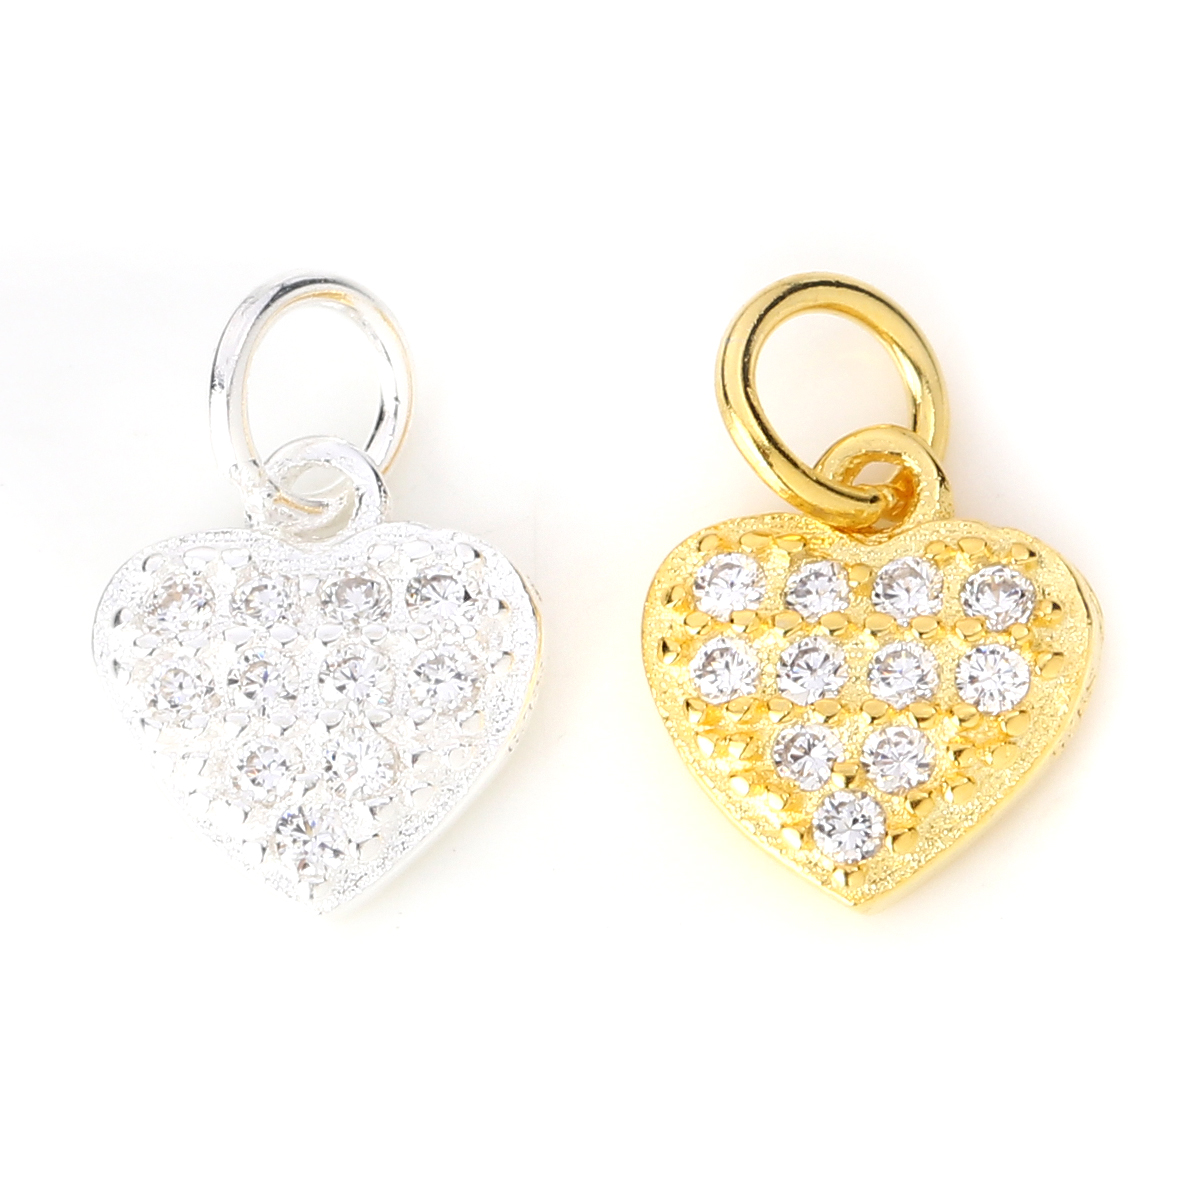 Picture of Sterling Silver Charms Silver Heart Clear Rhinestone 10mm( 3/8") x 7mm( 2/8"), 1 Piece